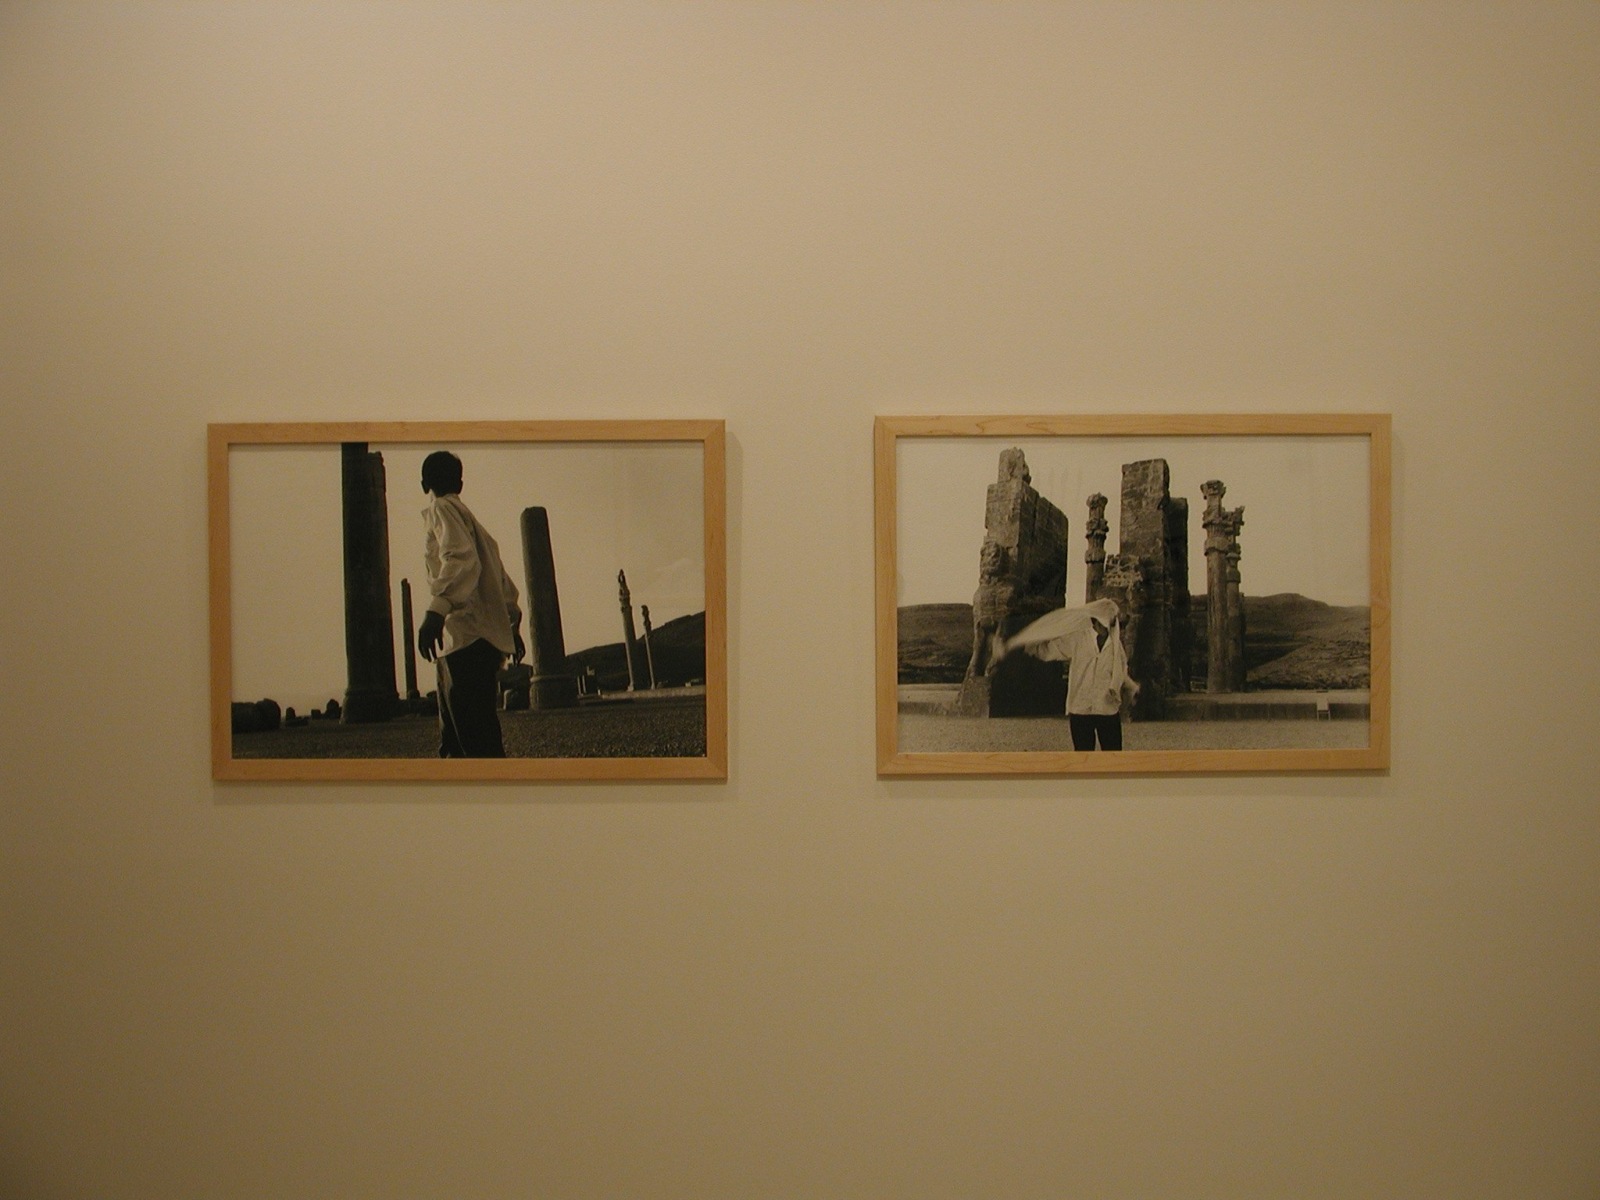 Two framed black and white photographs of a man standing in front of stone columns in the exhibition Sadegh Tirafkan at Lehmann Maupin in New York in 2004